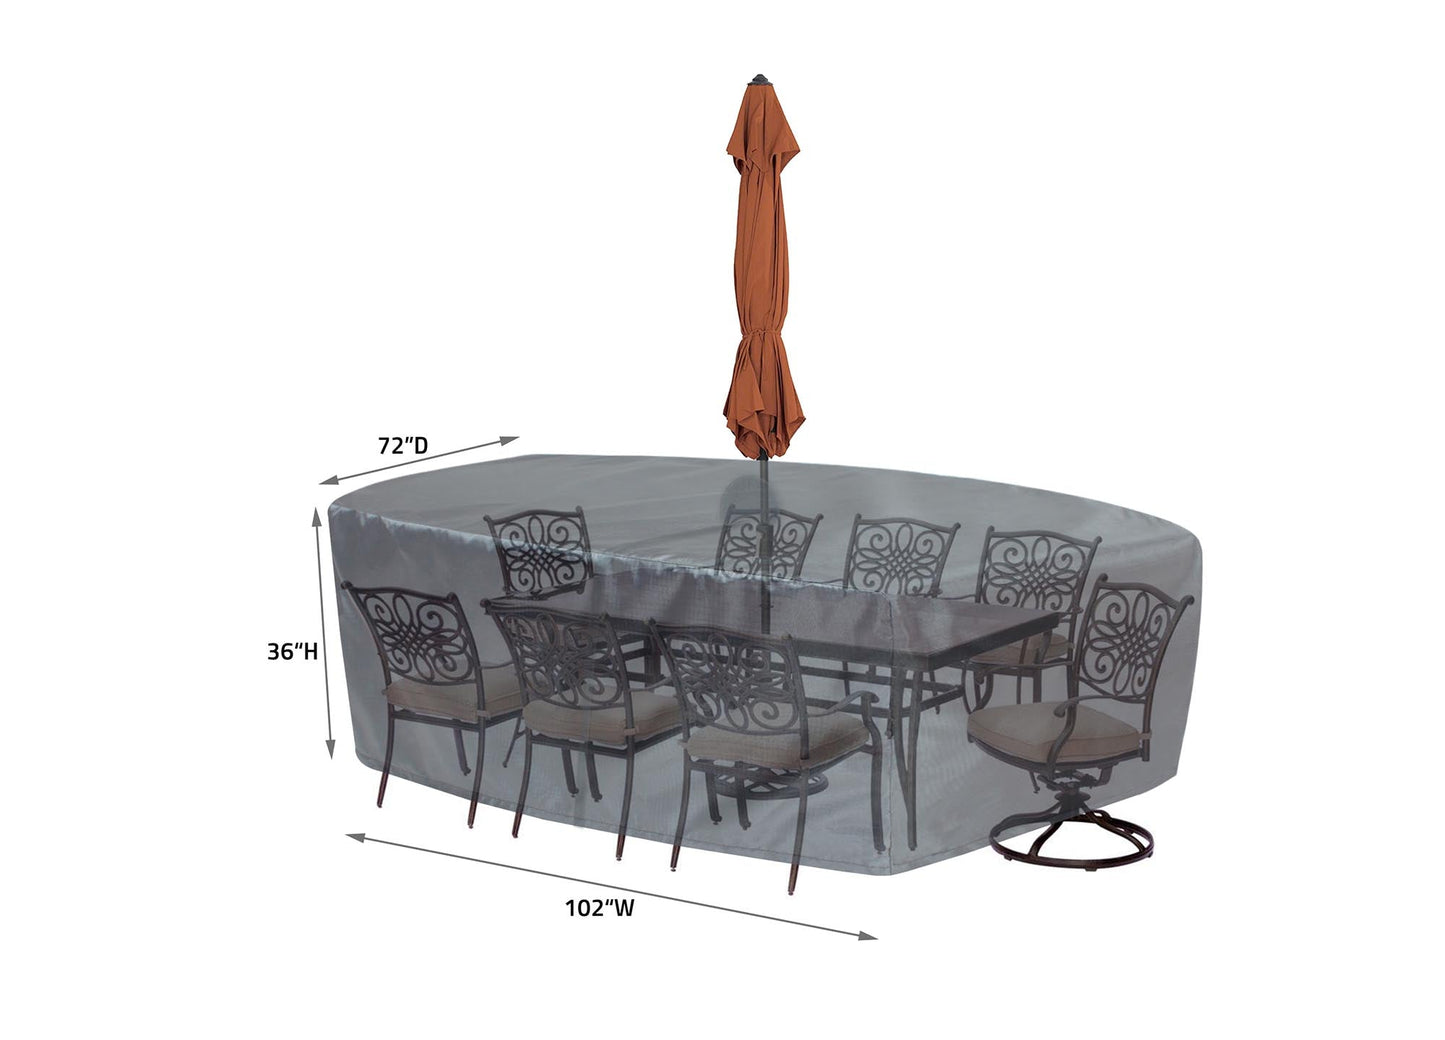 Shield Mercury Cover for 585 Fits Medium Oval/Rectangle
Table & Chairs w/8 ties, velcro
closure, elastic & spring cinch lock